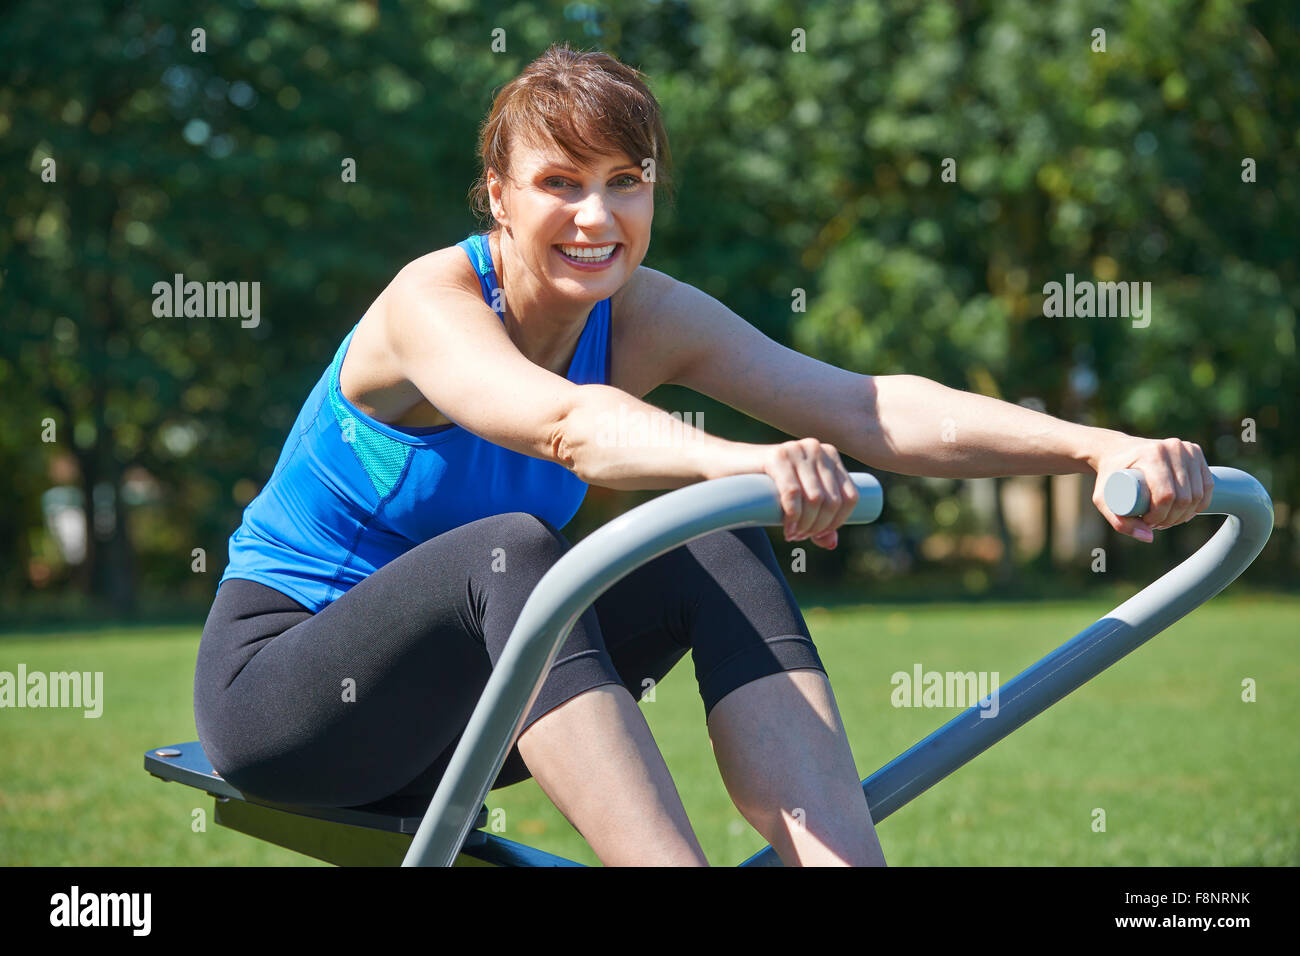 Mature Woman Exercising On Rowing Machine In Park Stock Photo